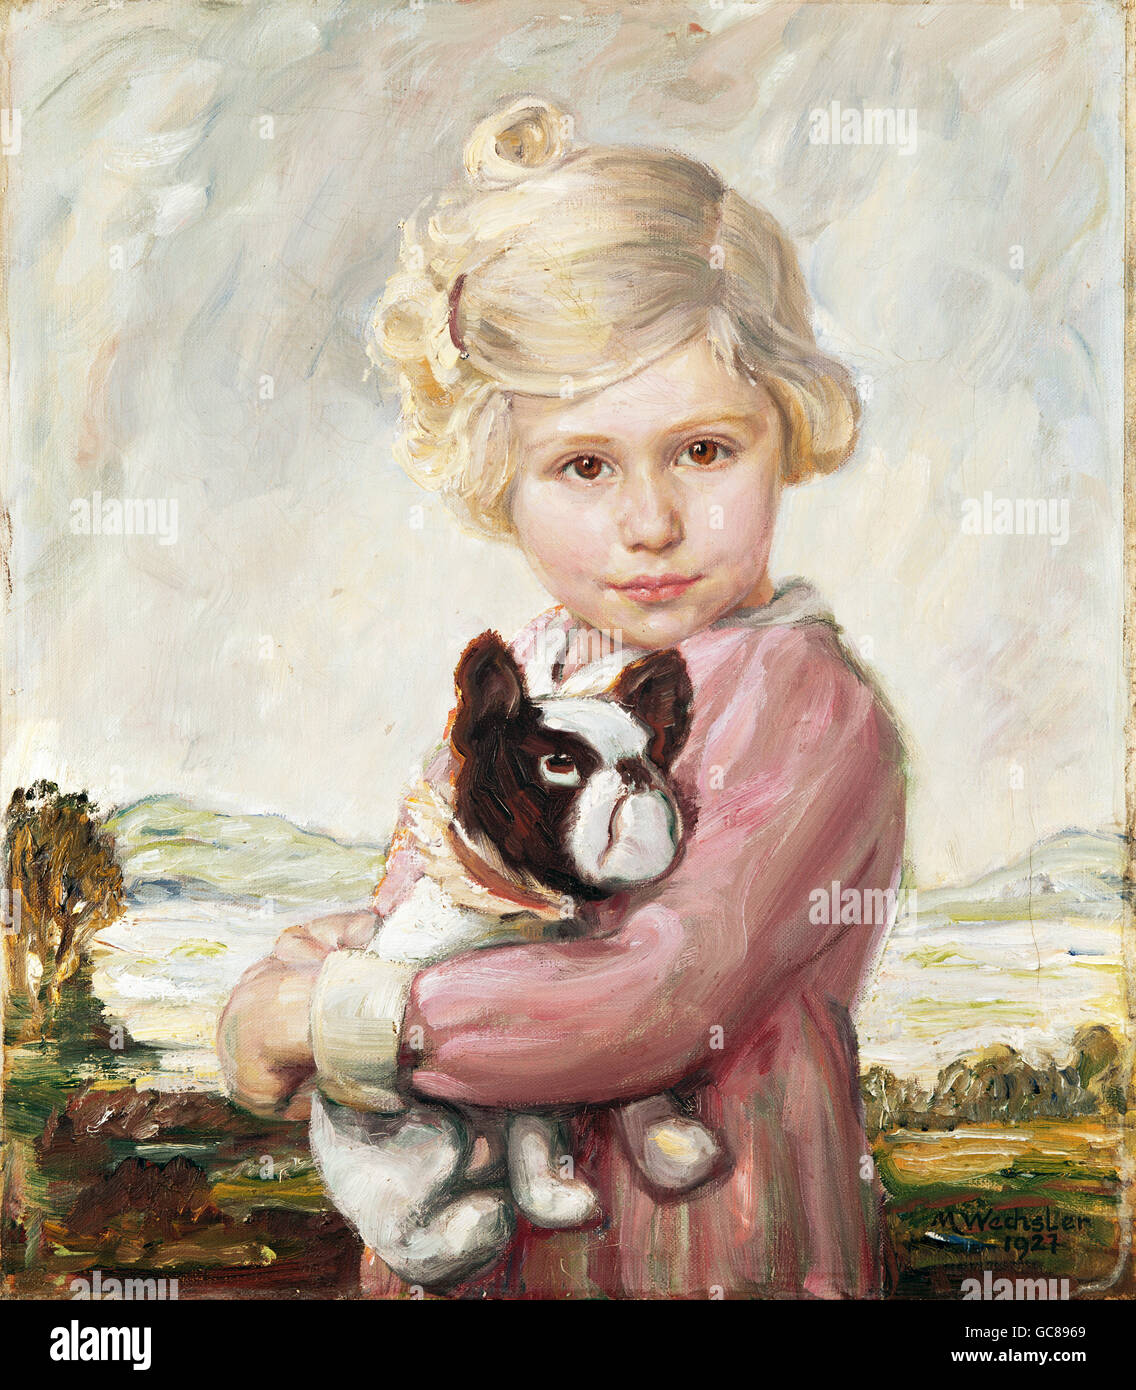 fine arts, Wechsler, Max, painting, 'Portrait of a Child', 1927, private collection, Munich, Germany, Stock Photo